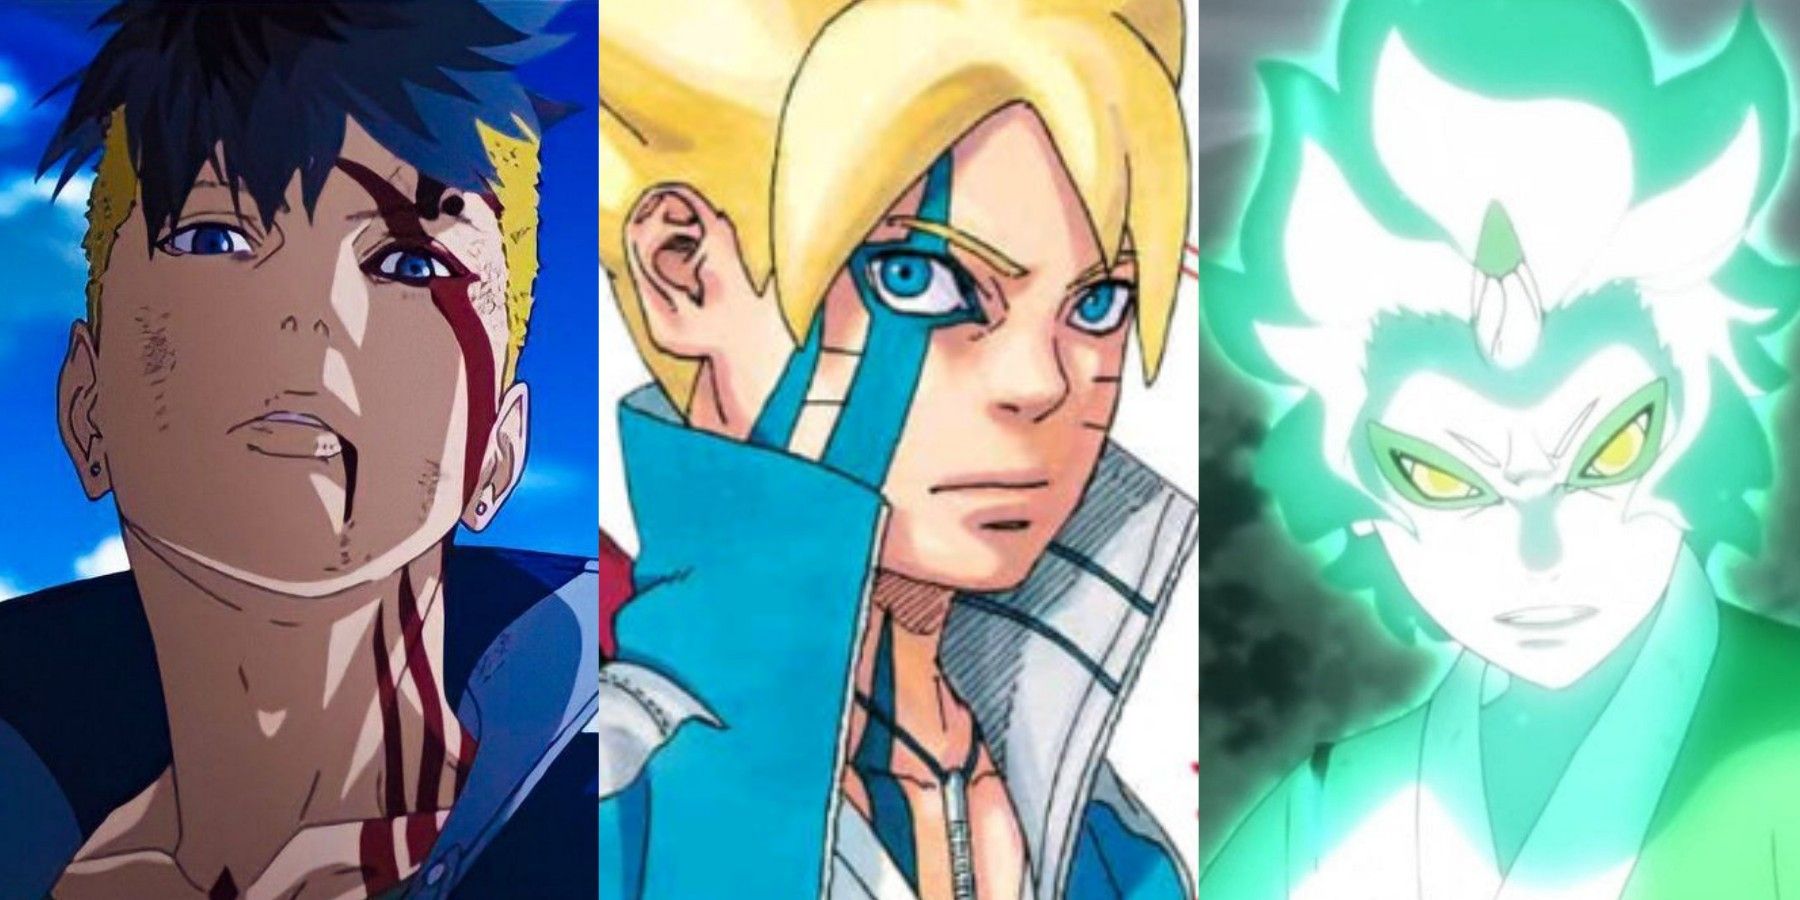 Characters appearing in Boruto: Naruto Next Generations - Part II Anime